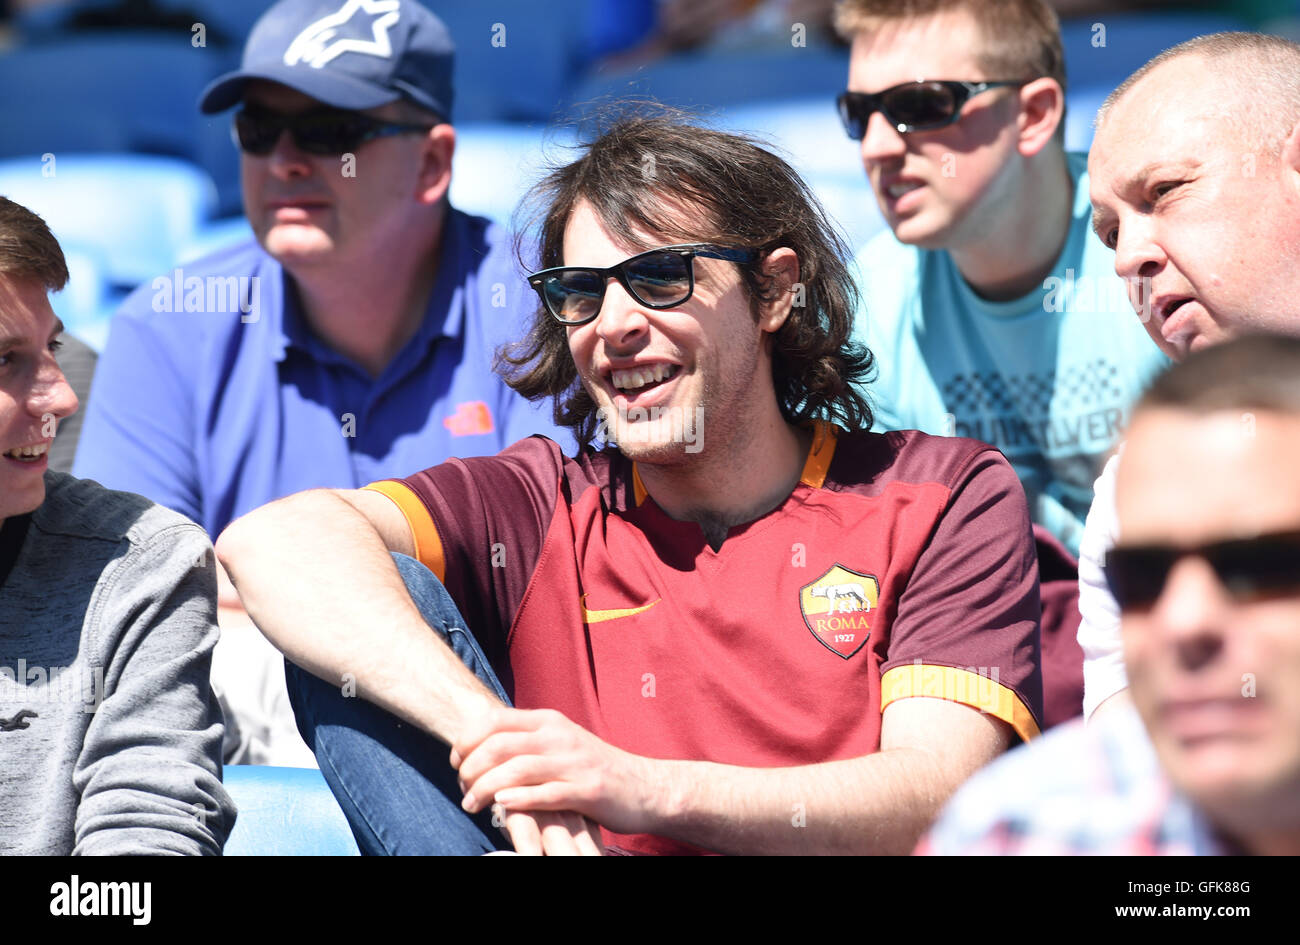 A Roma fan amongst Brighton fans during the Friendly match between Brighton and Hove Albion and Lazio at the American Express Community Stadium in Brighton and Hove. July 31, 2016. Stock Photo